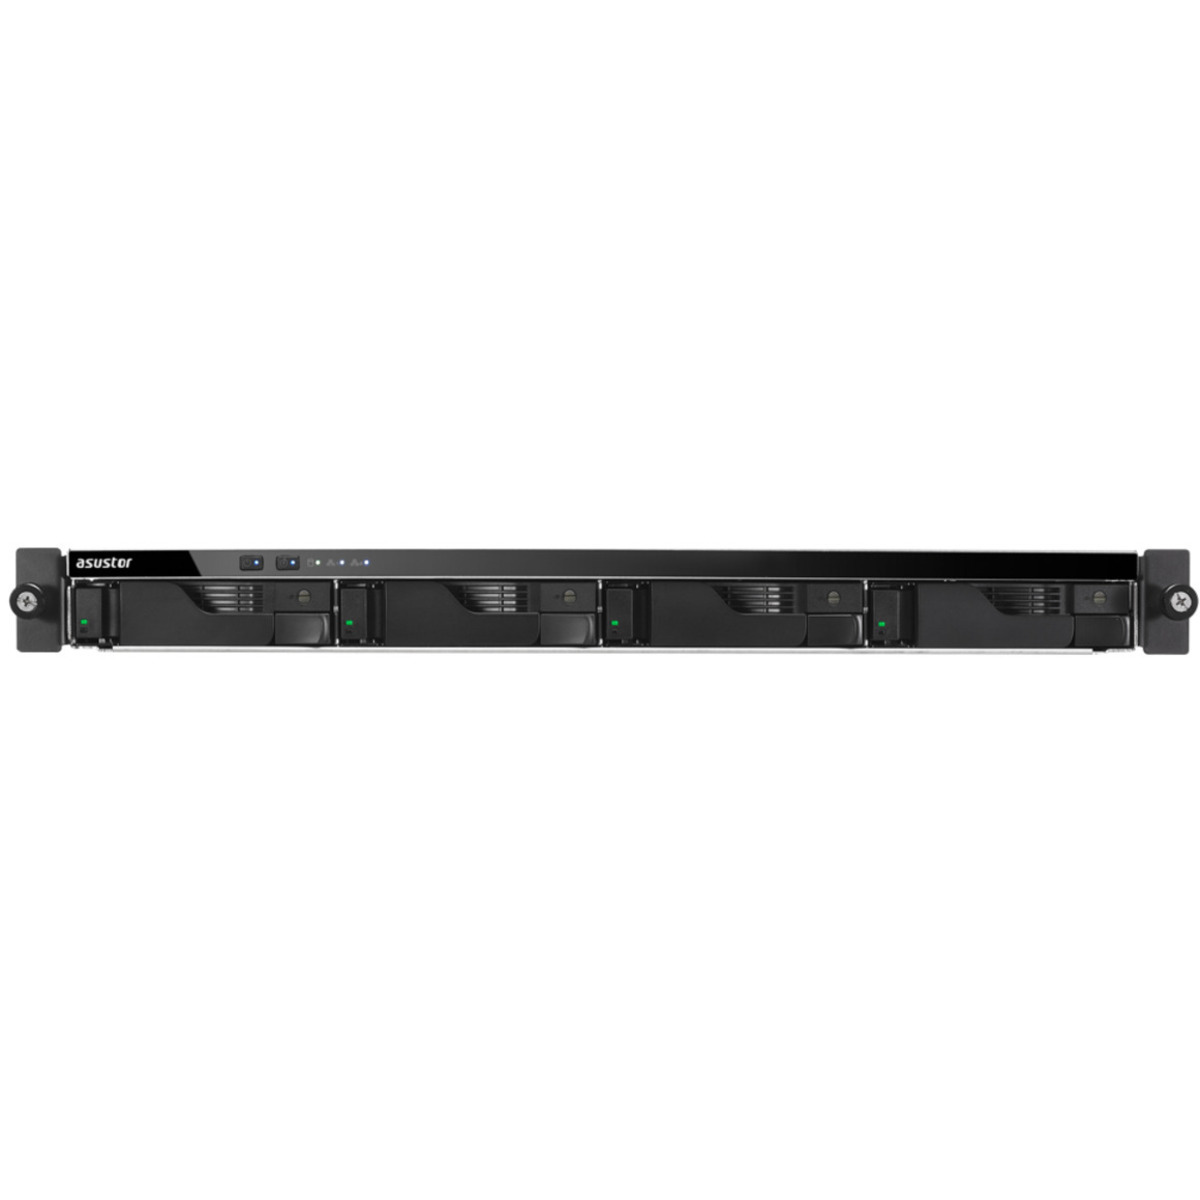 ASUSTOR LOCKERSTOR 4RS AS6504RS 44tb 4-Bay RackMount Multimedia / Power User / Business NAS - Network Attached Storage Device 2x22tb Seagate IronWolf Pro ST22000NT001 3.5 7200rpm SATA 6Gb/s HDD NAS Class Drives Installed - Burn-In Tested - FREE RAM UPGRADE LOCKERSTOR 4RS AS6504RS